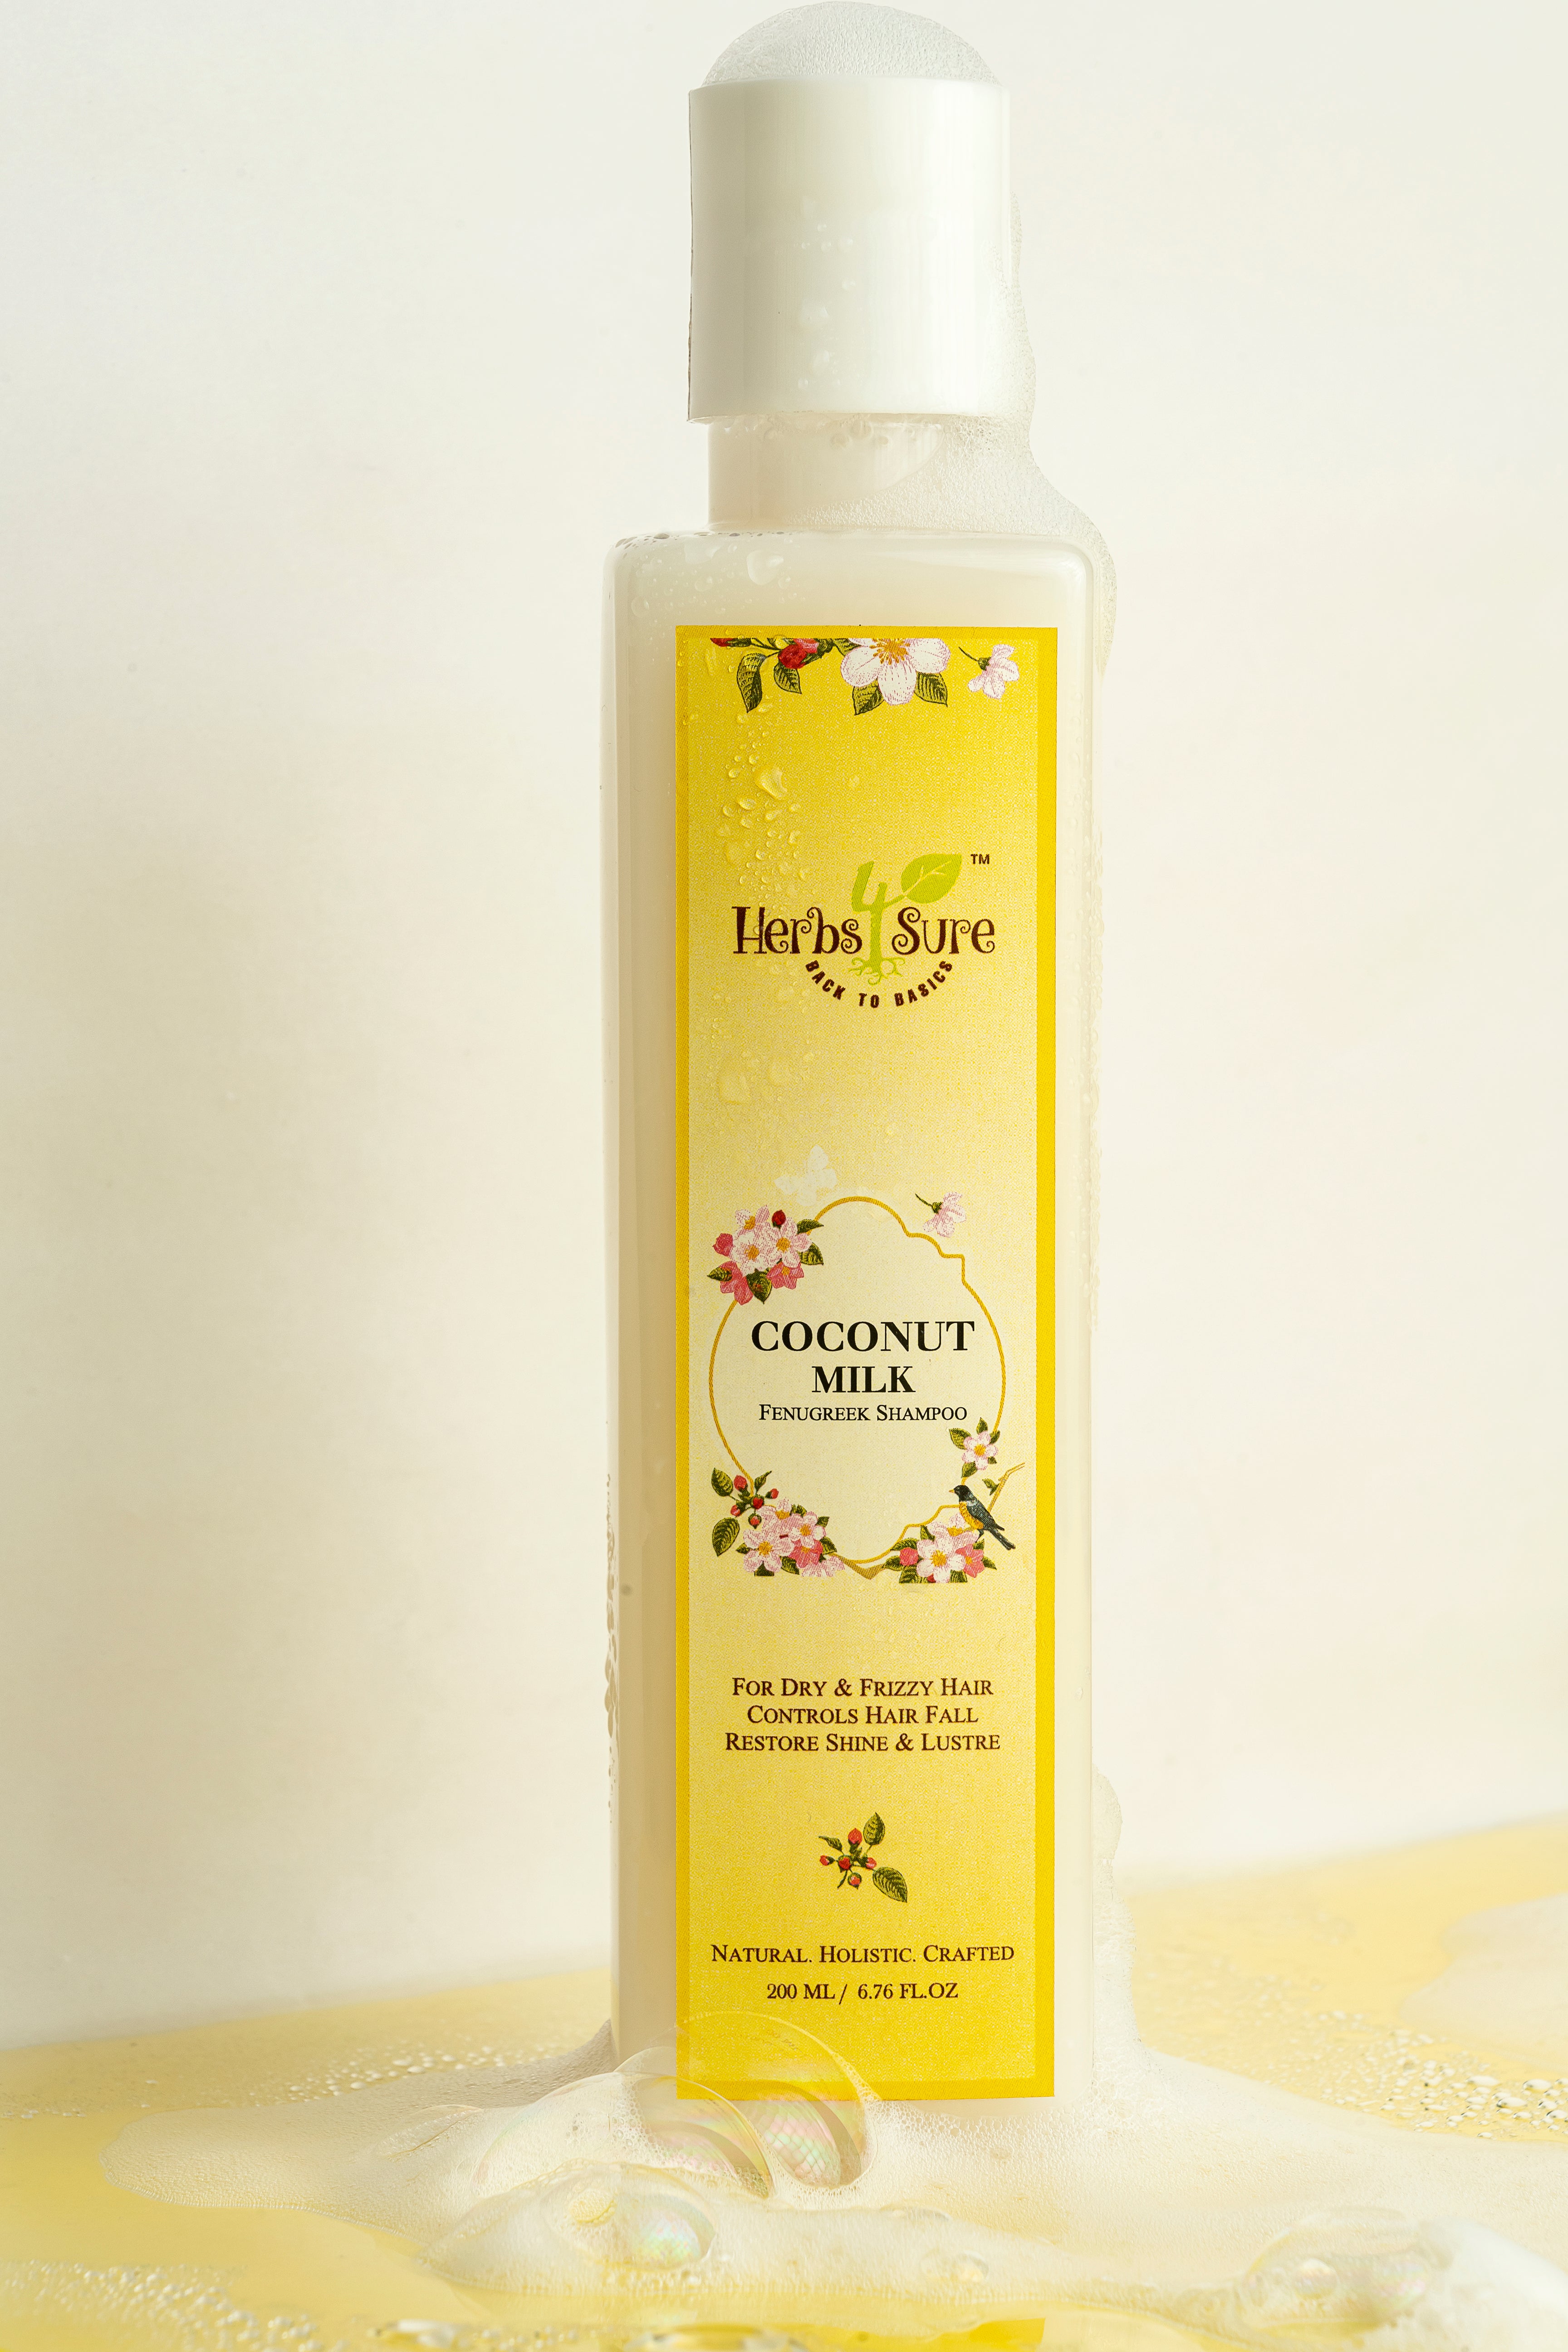 COCONUT MILK & FENUGREEK SHAMPOO- For Dry frizzy Unmanageable Hair- Gives Bounce and Shine to hair